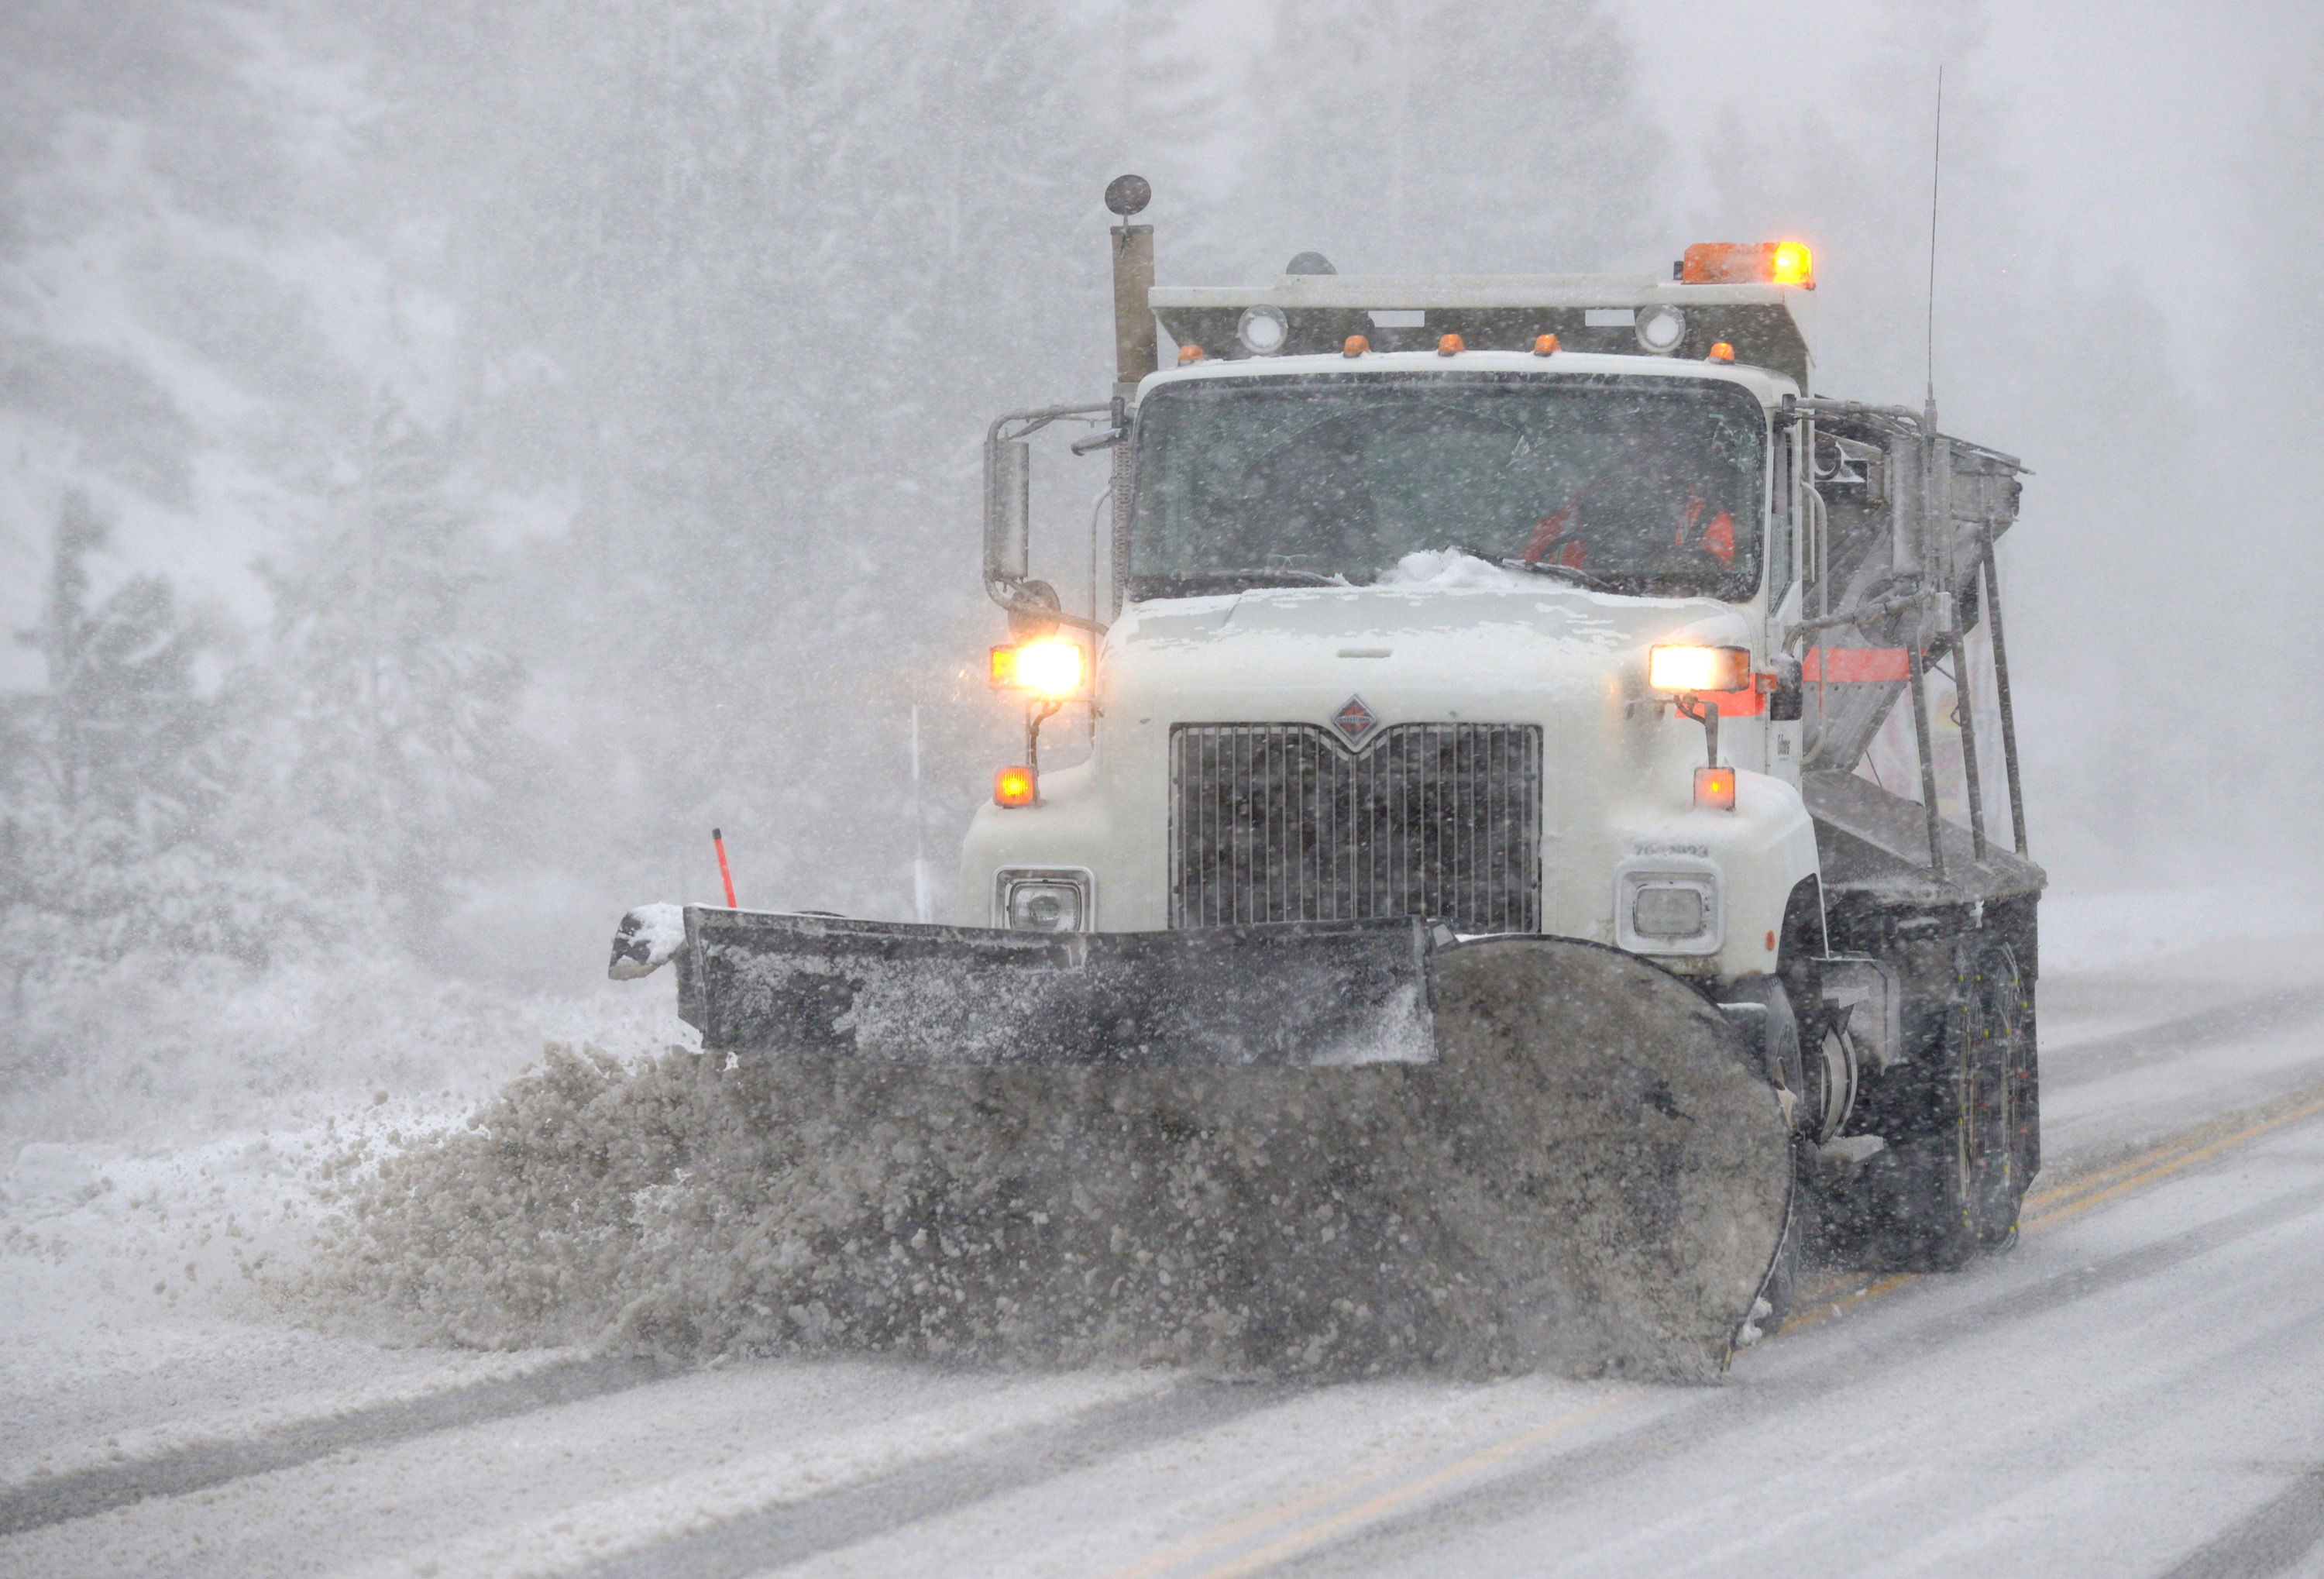 A Caltrans snowplow clears Highway 88 in Woodford, California